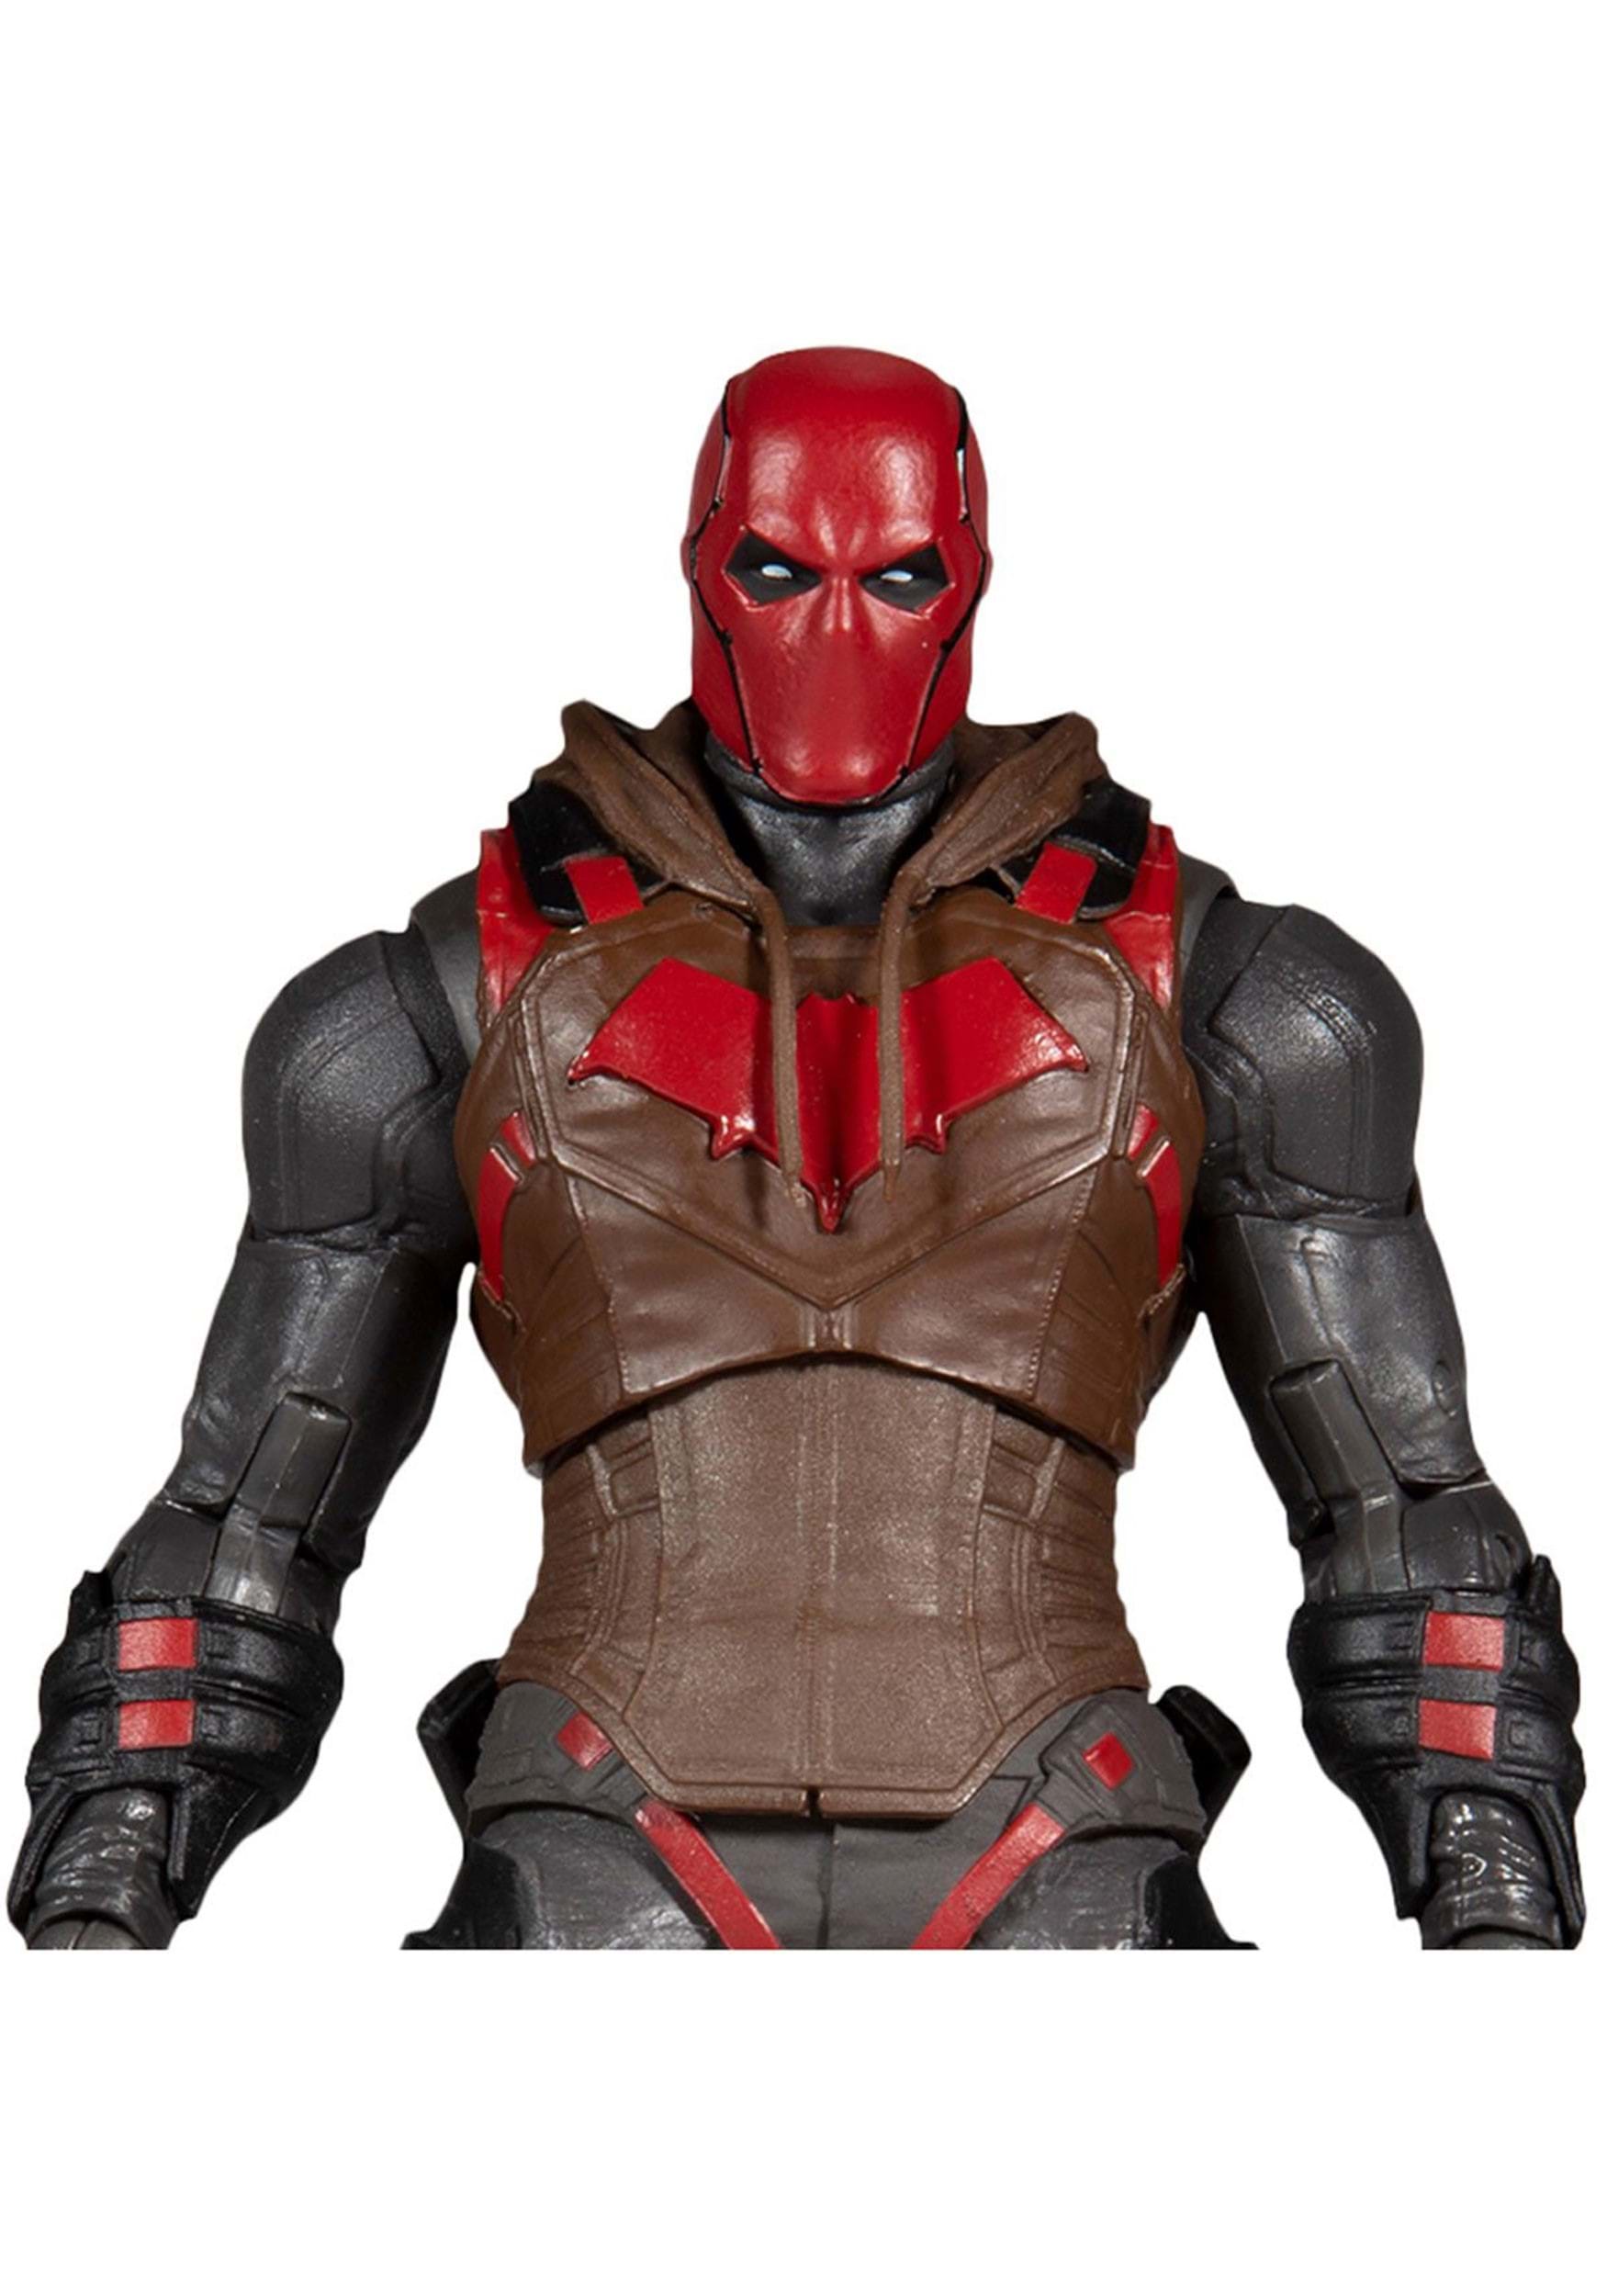 DC Gaming Red Hood Injustice 2 7-Inch Action Figure